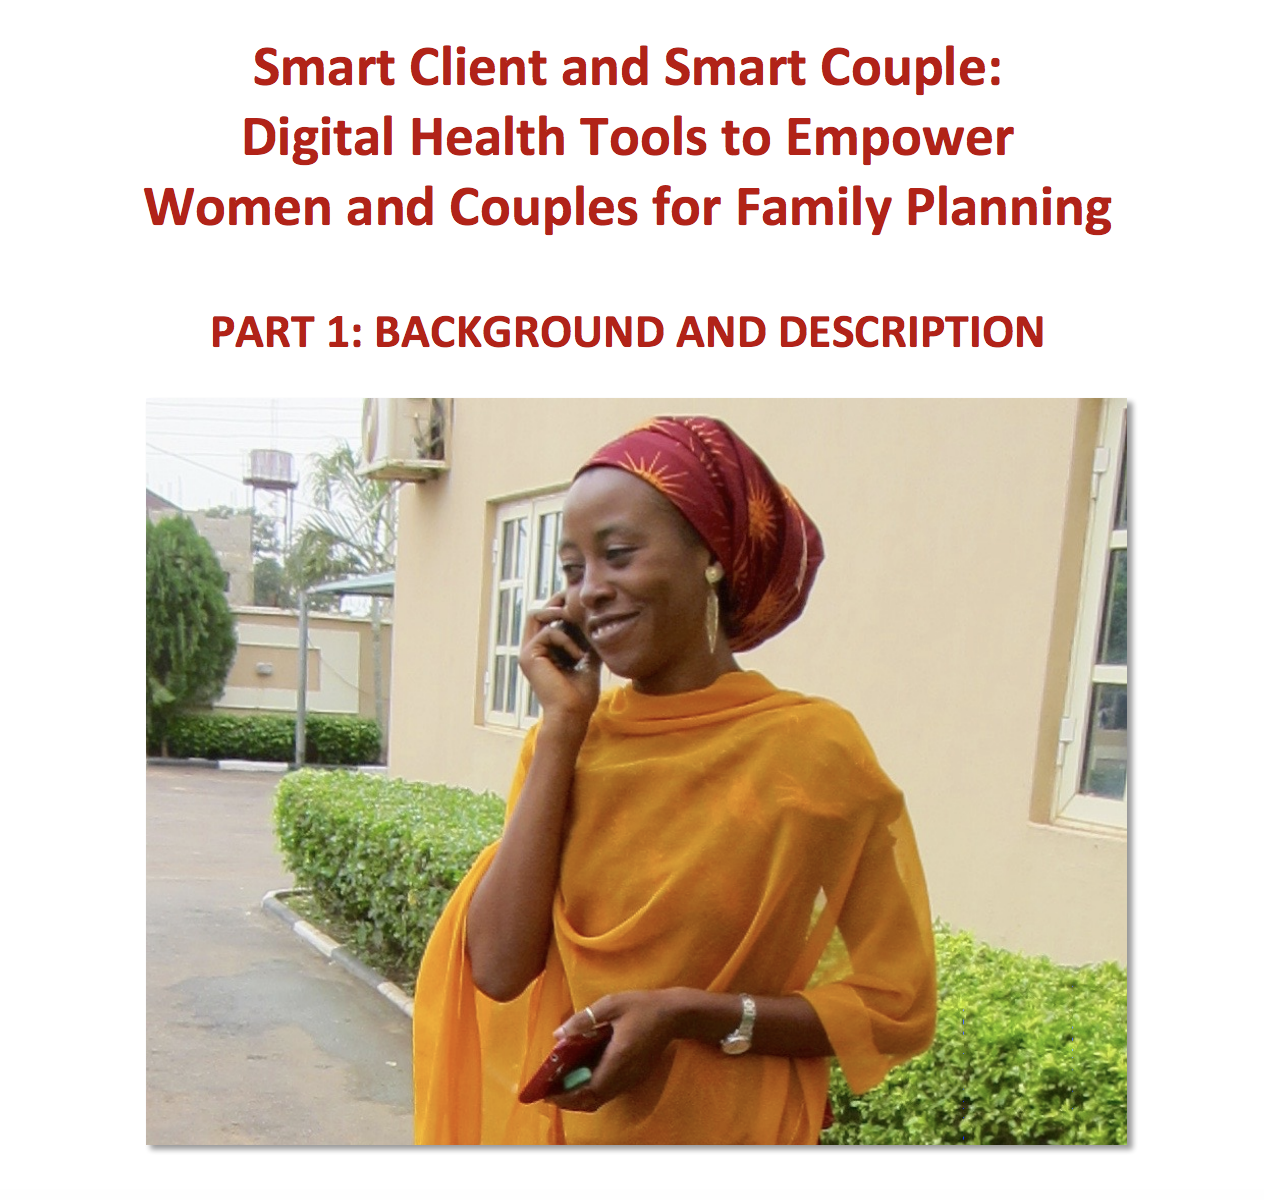 Smart Client and Smart Couples: Digital Health Tools to Empower Women and Couples for Family Planning